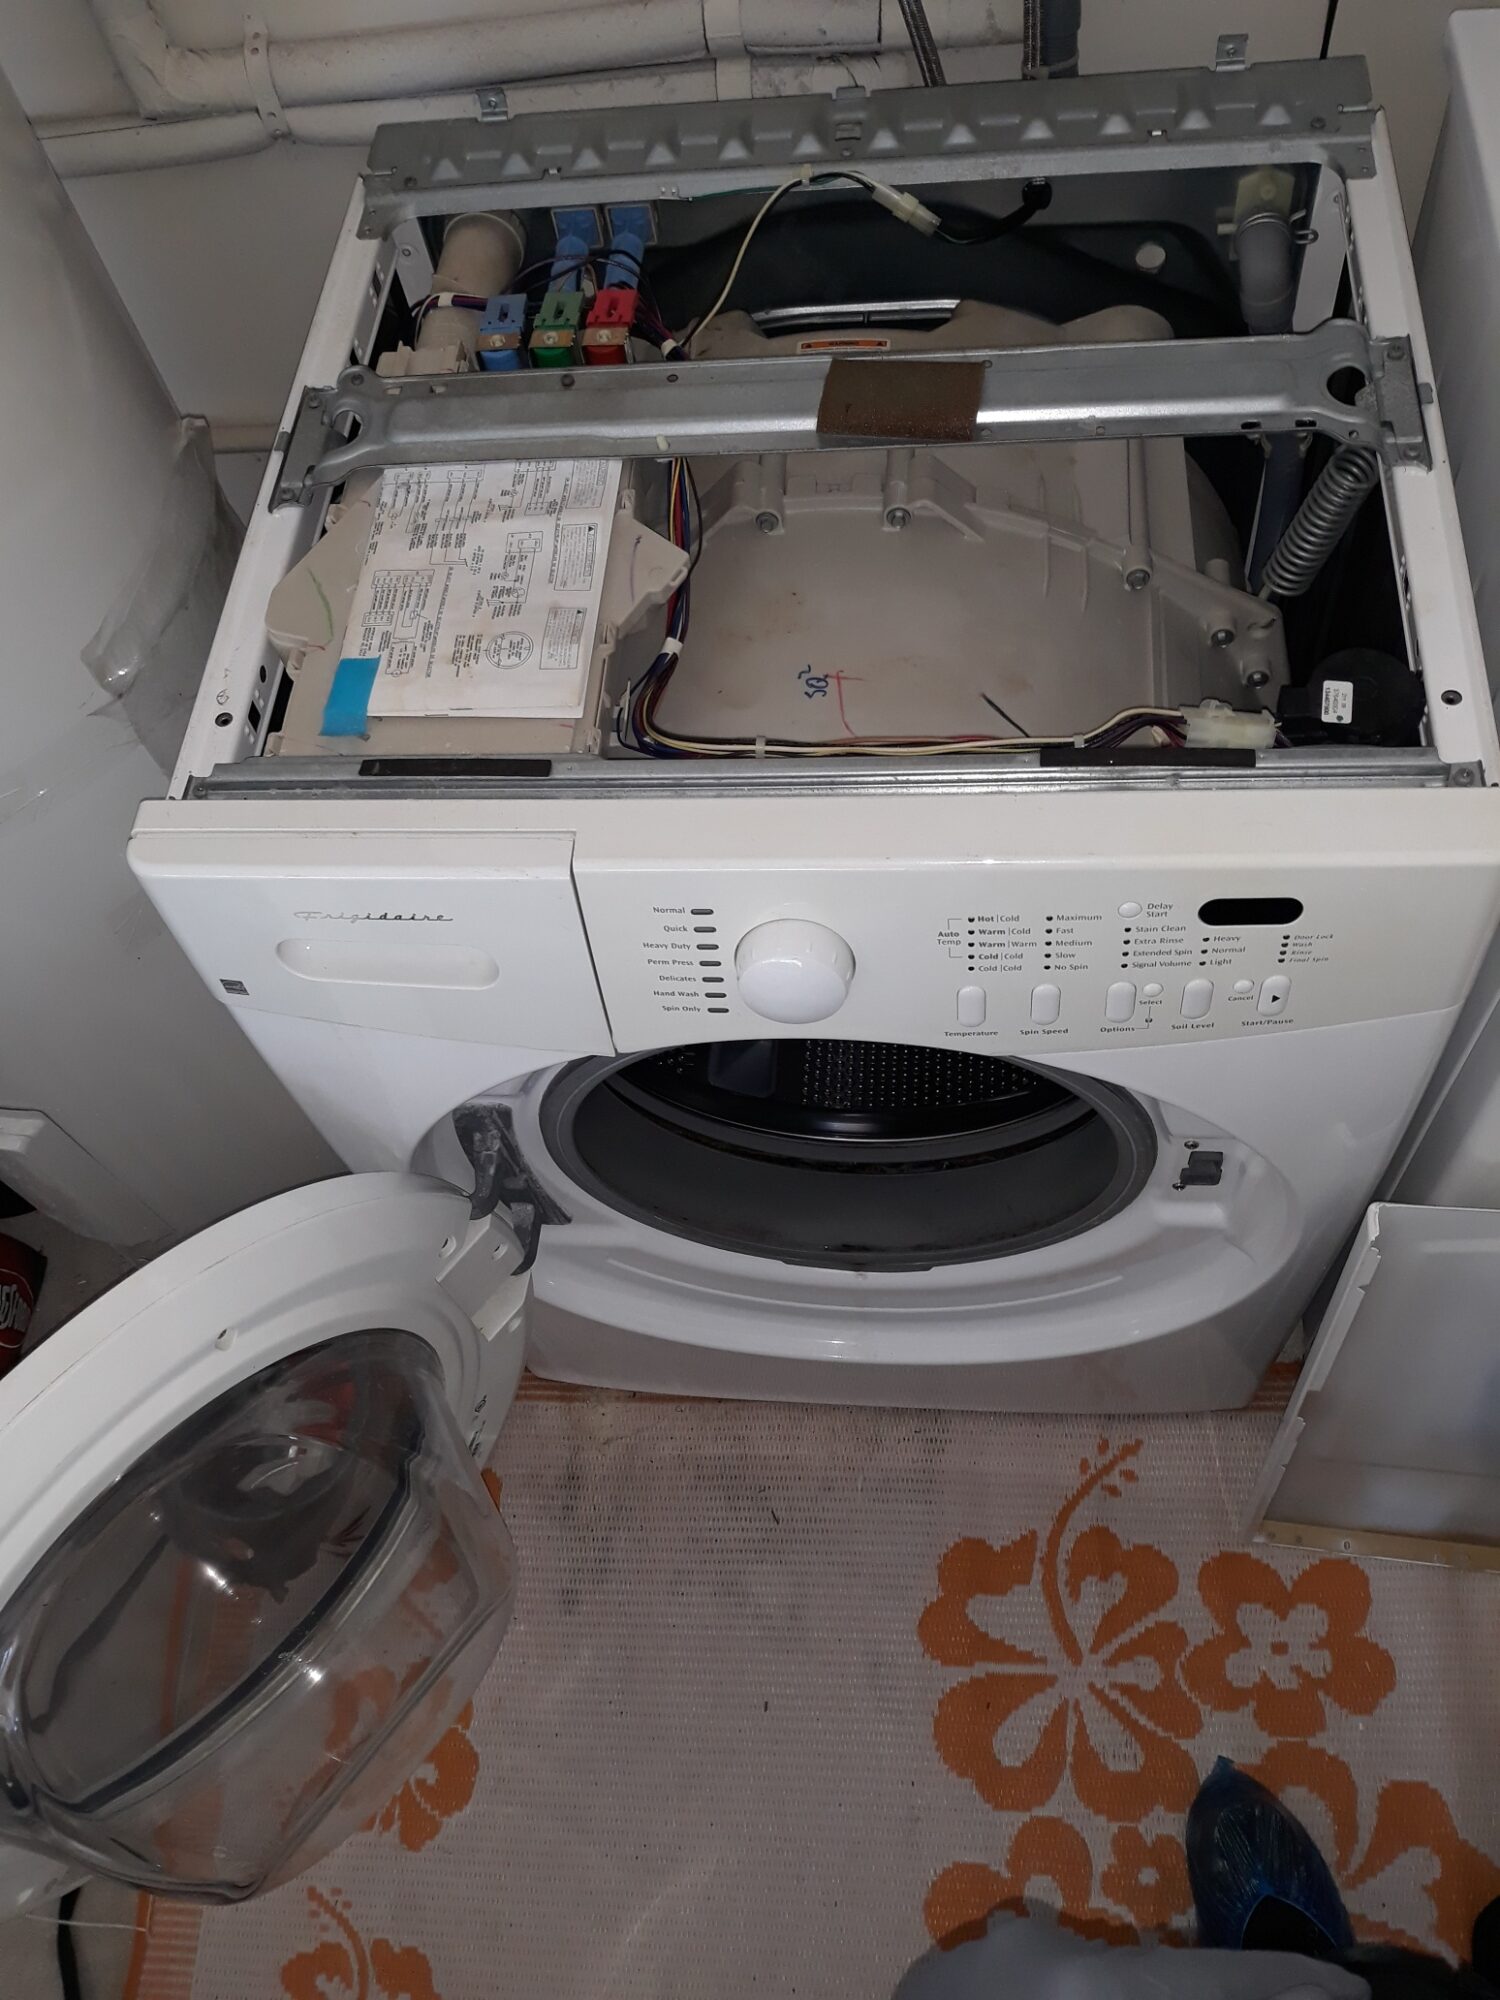 appliance repair washing machine repair repair require major disassembly and multiple parts replacements due worn tub bearings tuskegee st leesburg fl 34748